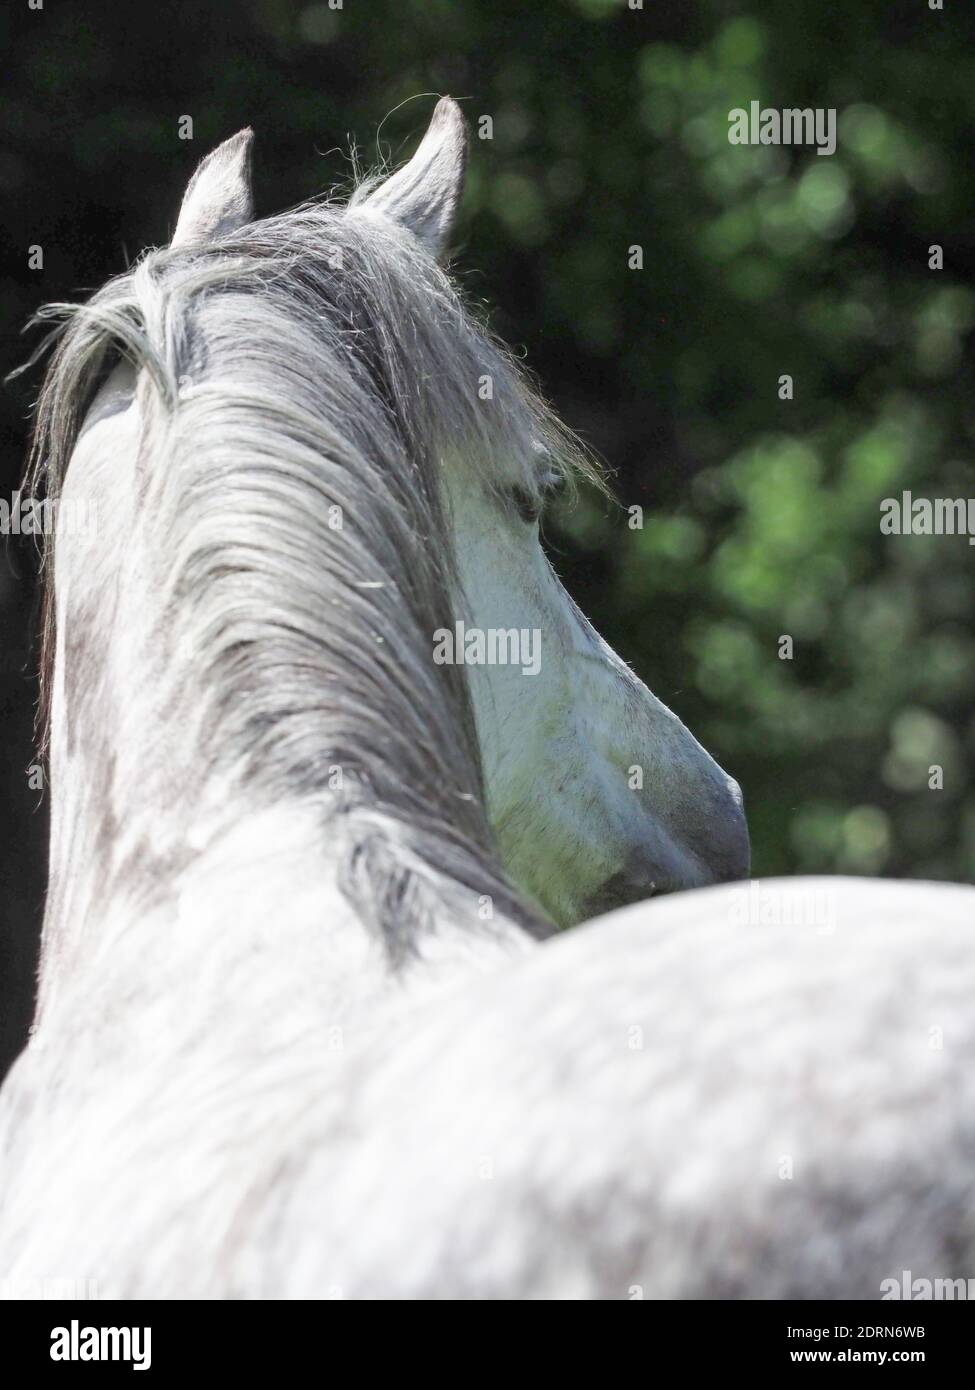 A grey horse shot from the back showing the spine, neck and mane Stock Photo